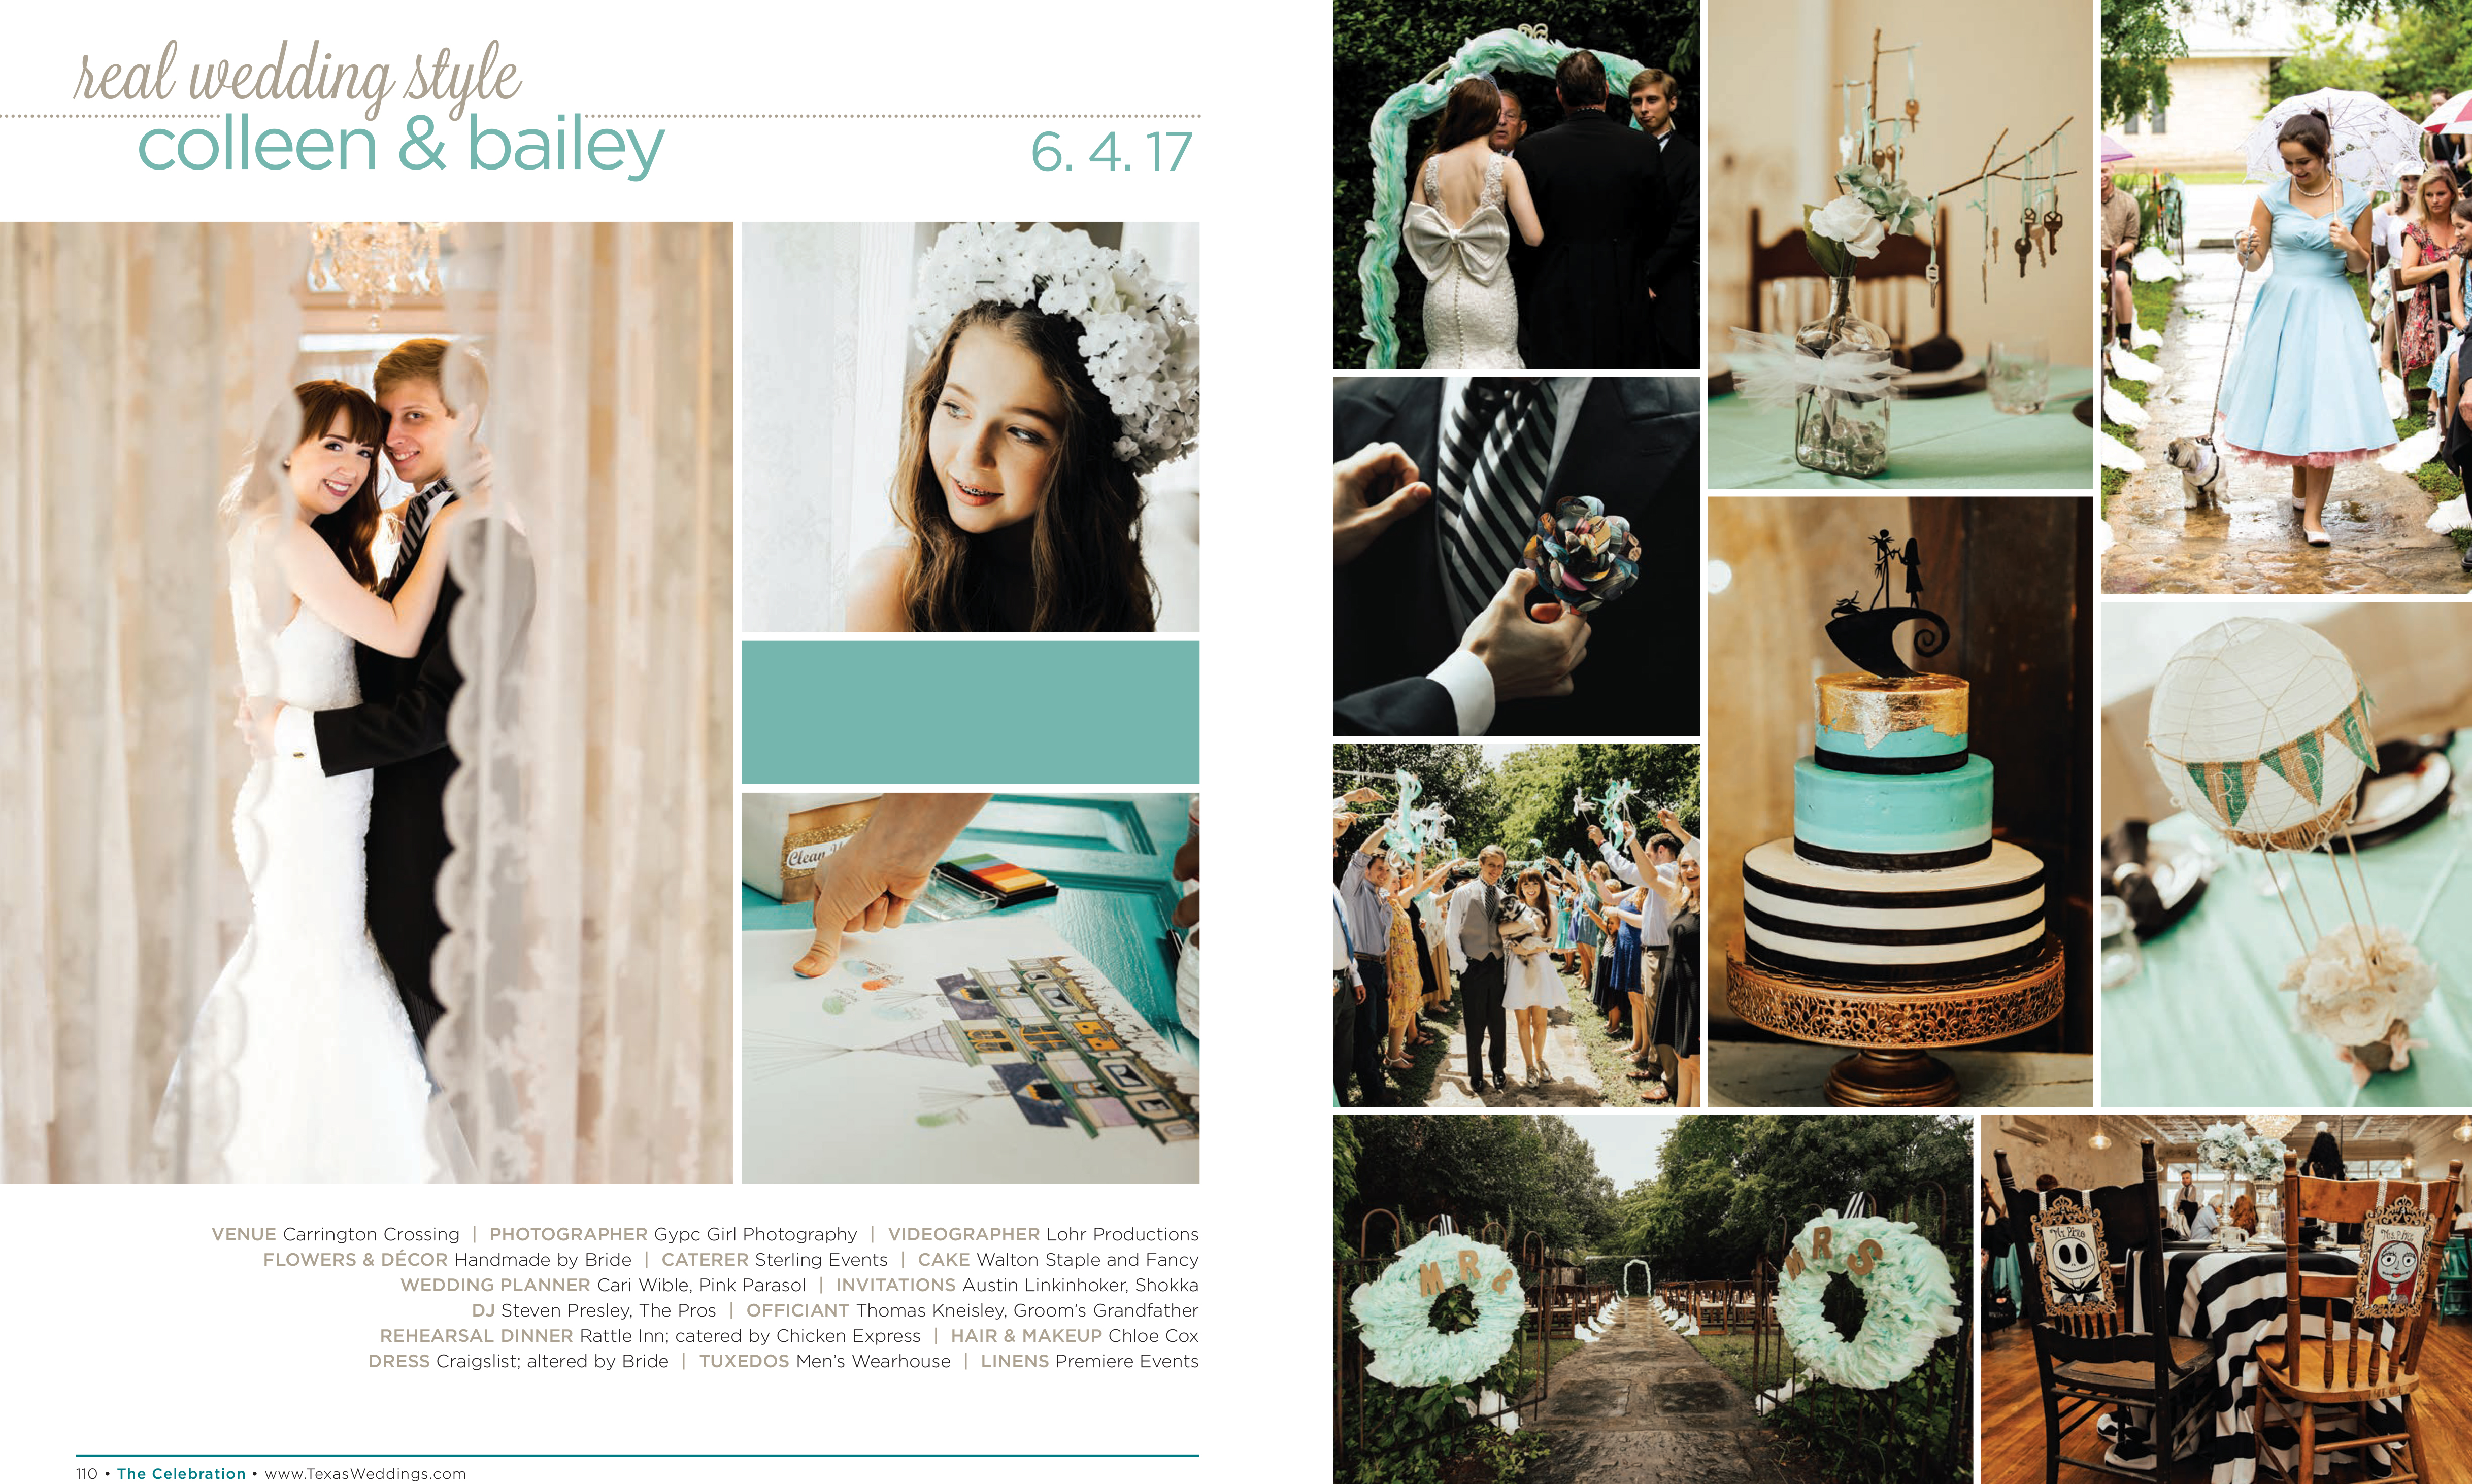 Colleen & Bailey in their Real Wedding Page in the Fall/Winter 2017 Texas Wedding Guide